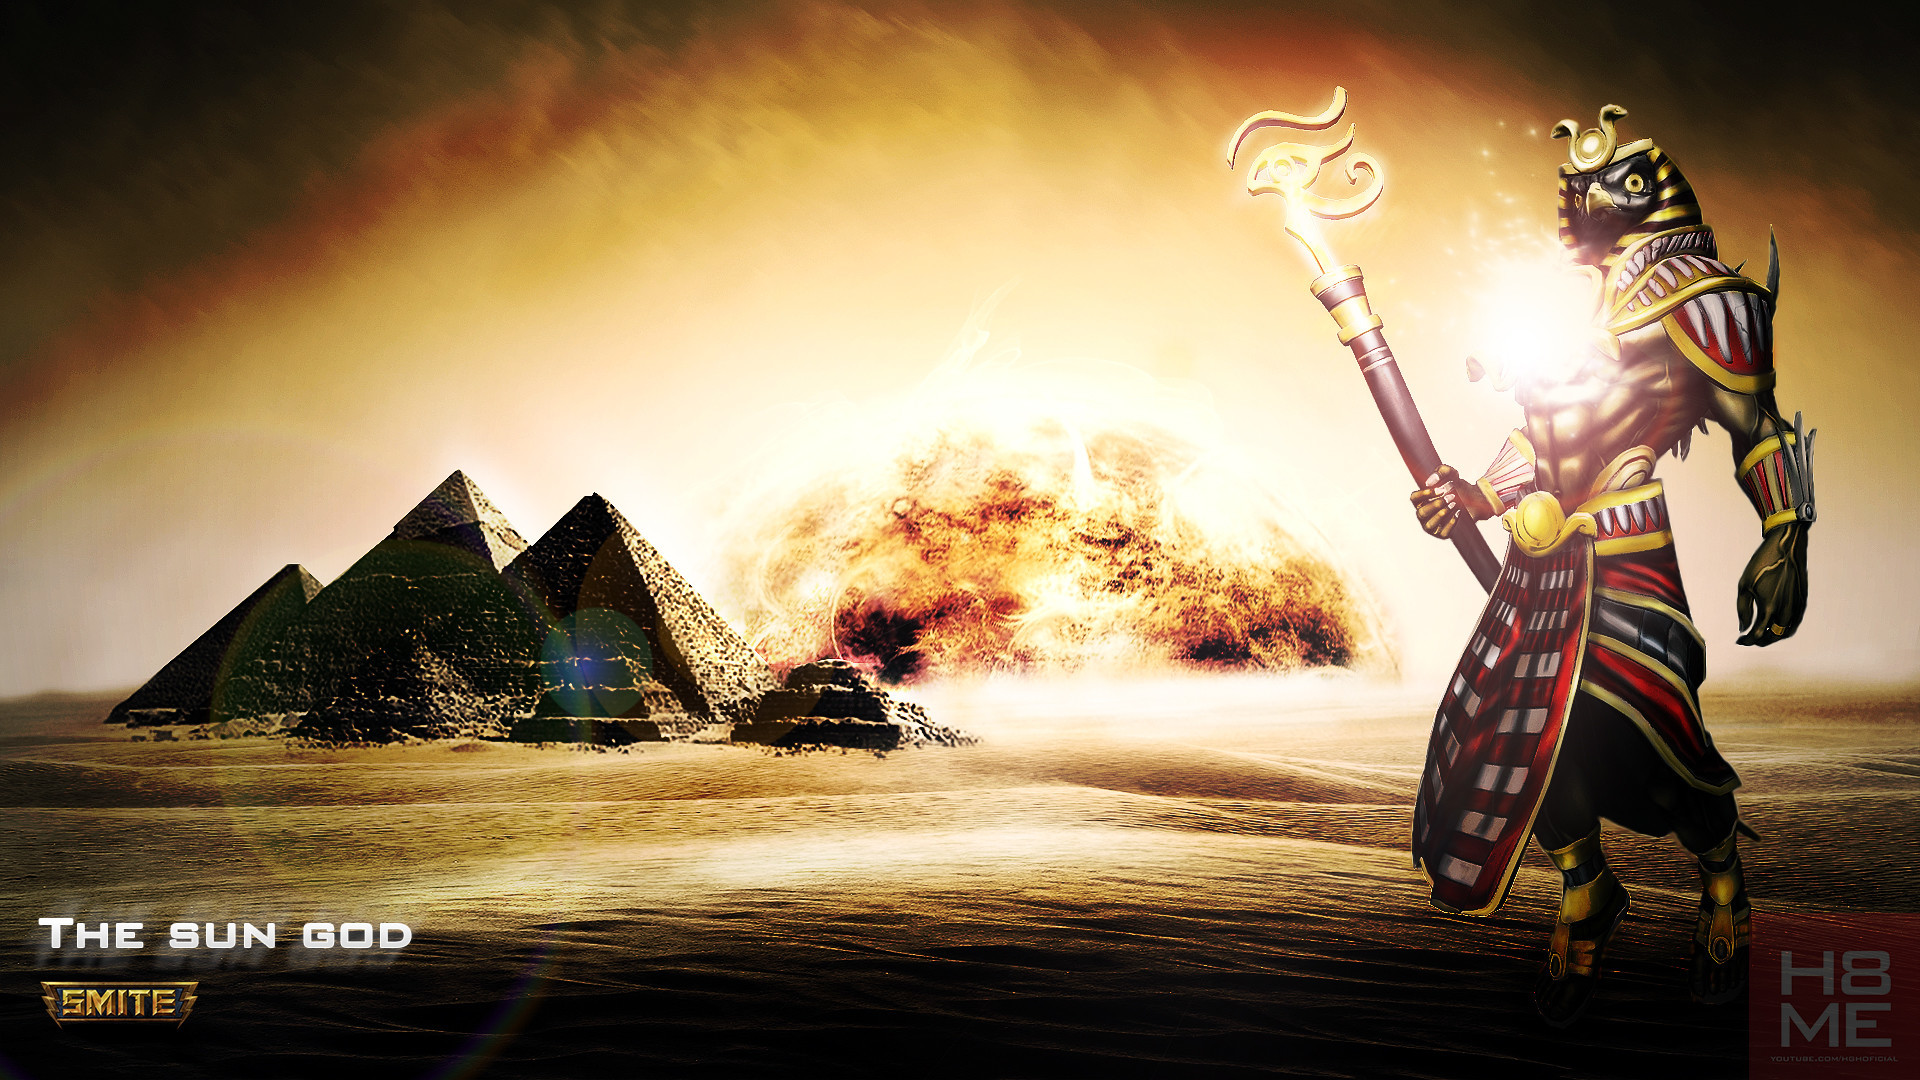 1920x1080 Egyptian 100% Quality HD Wallpapers - PTW-HD Quality Pictures .